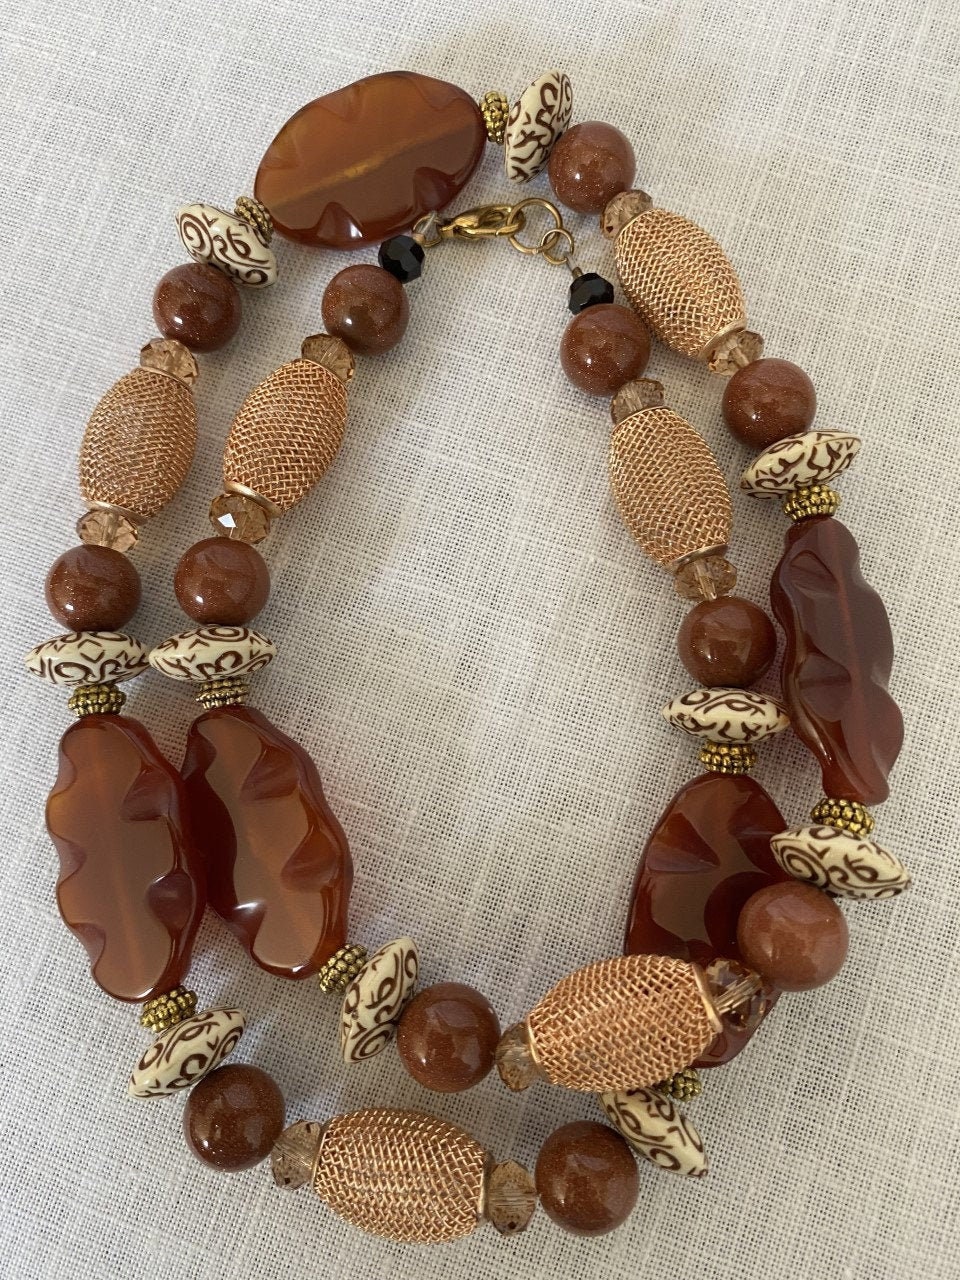 Carnelian and Goldstone Necklace - Etsy